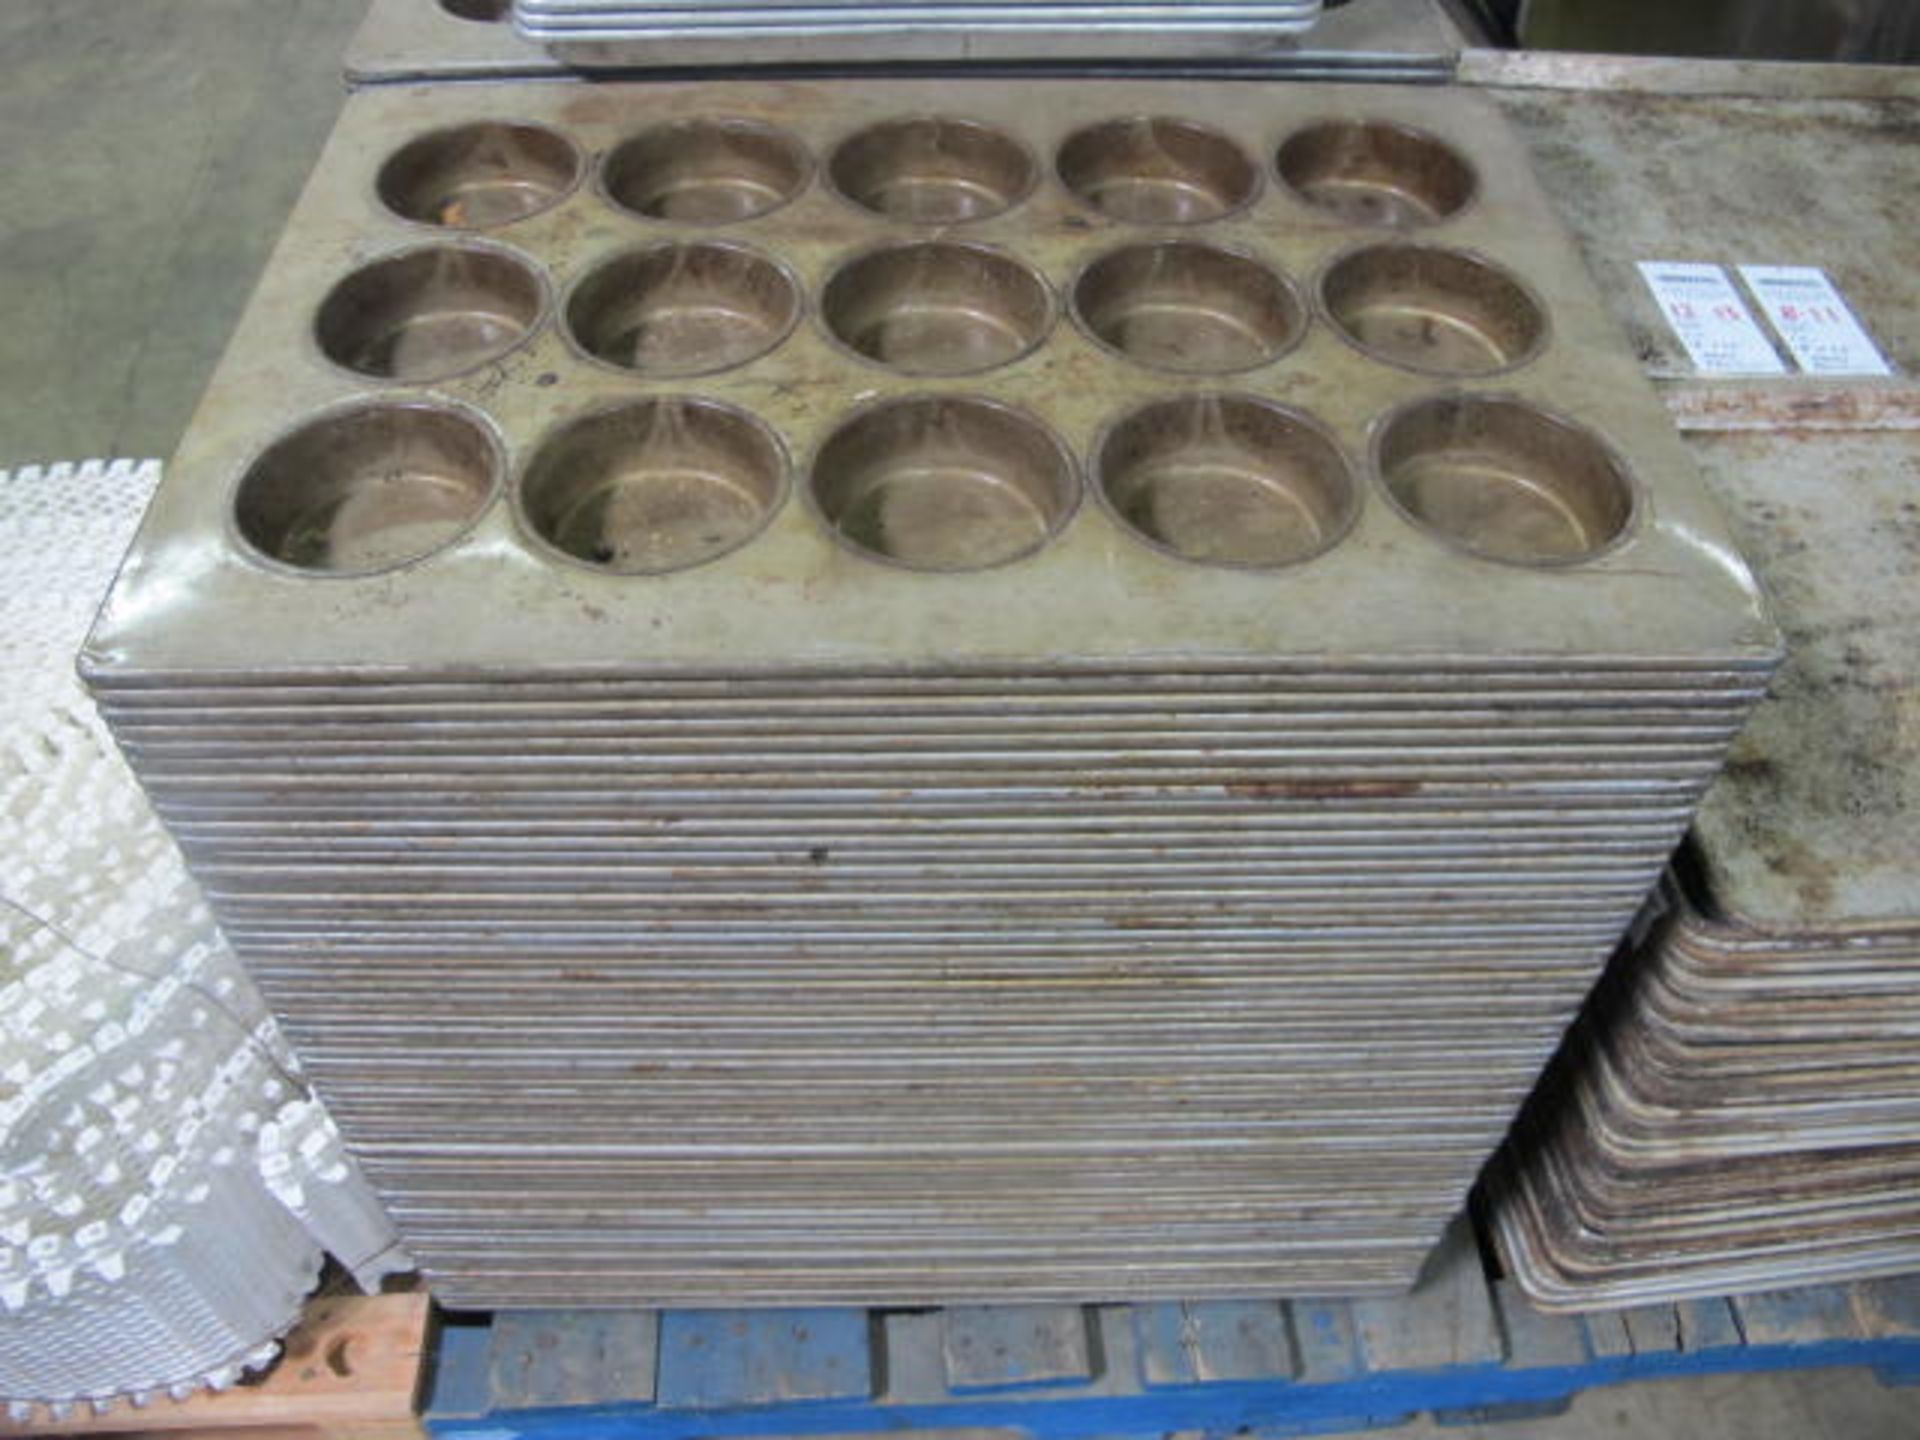 LOT, 20X, 18" x 26" MUFFIN PANS (4" ROUND) - Image 3 of 3